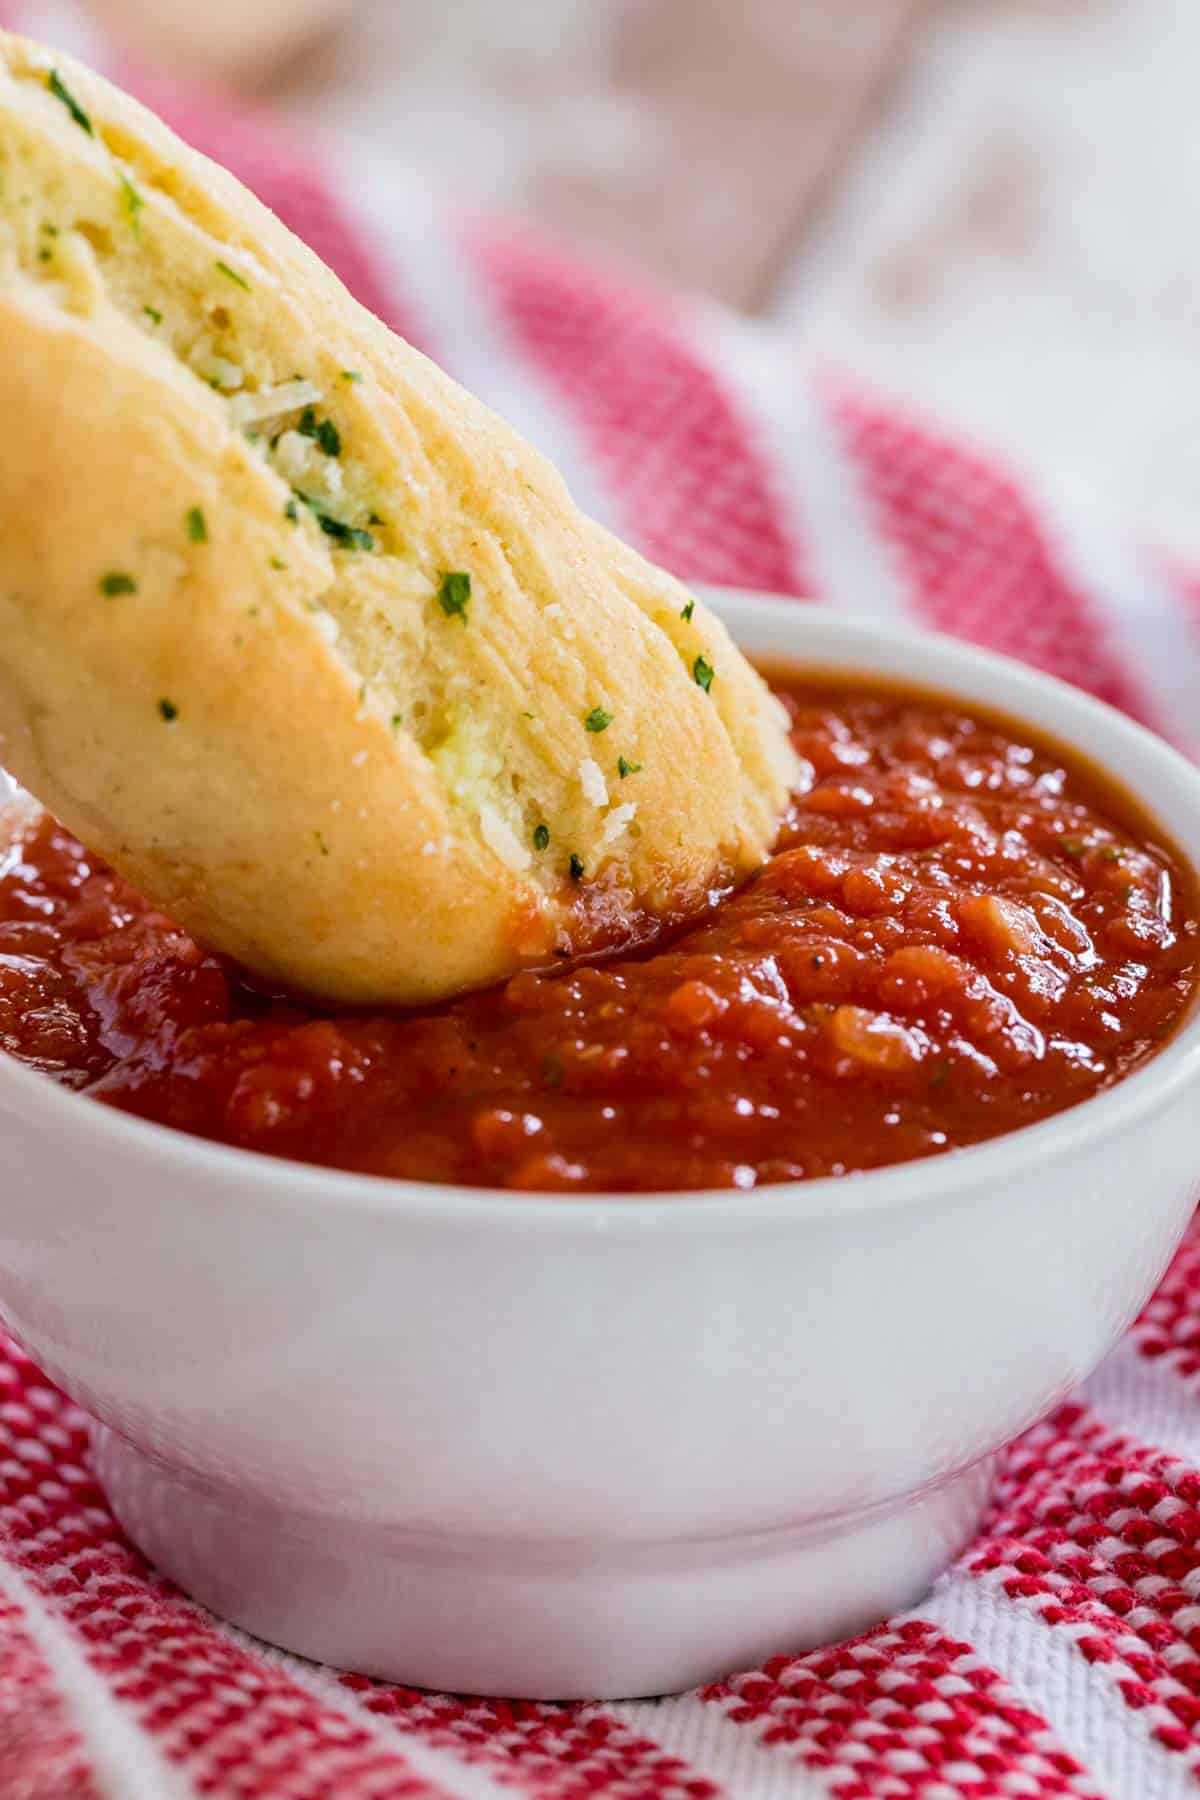 A breadstick being dunked into a bowl of marinara sauce.